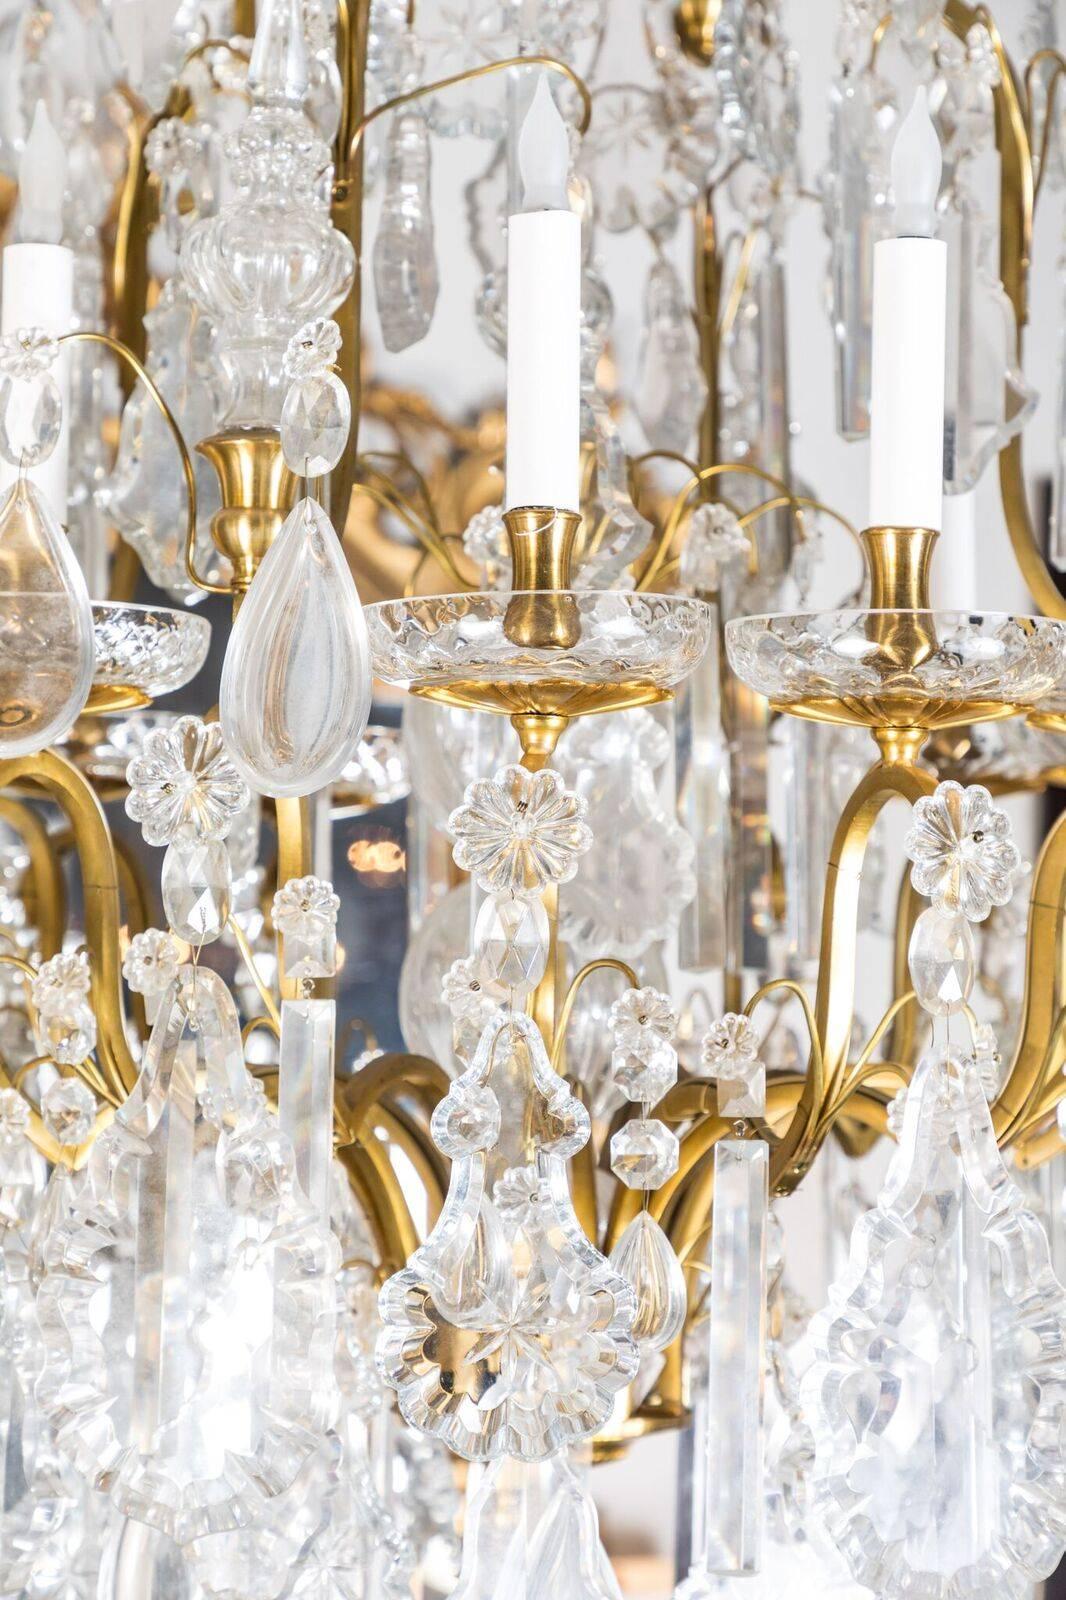 Richly embellished, large, gilt bronze and crystal, Louis XIV-style, twelve-light chandelier with a large, center tower. The whole surmounted by an impressive, crystal beaded, balloon-form canopy.